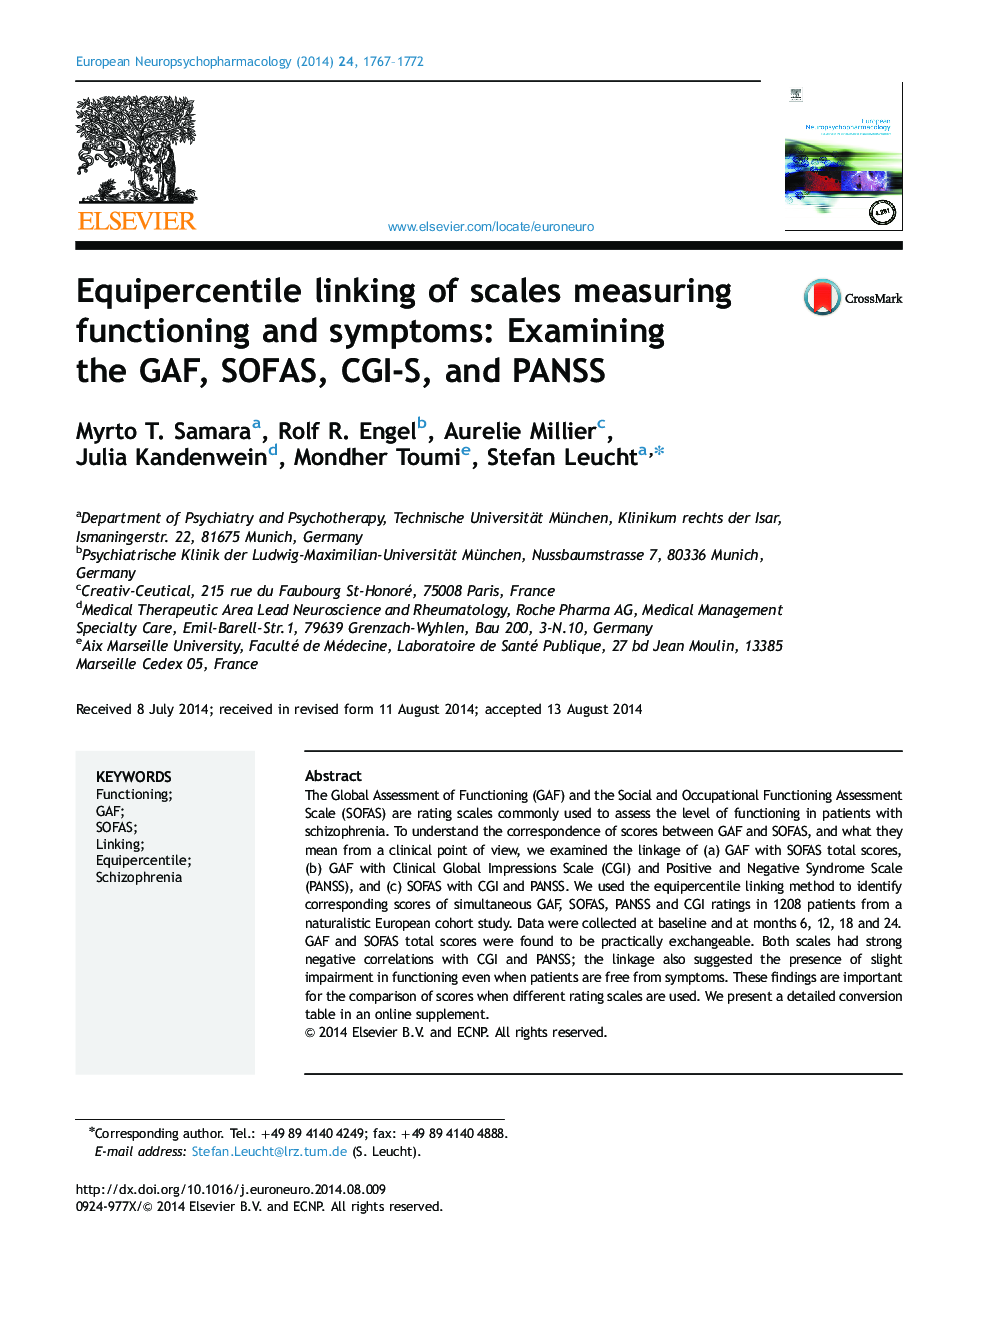 Equipercentile linking of scales measuring functioning and symptoms: Examining the GAF, SOFAS, CGI-S, and PANSS